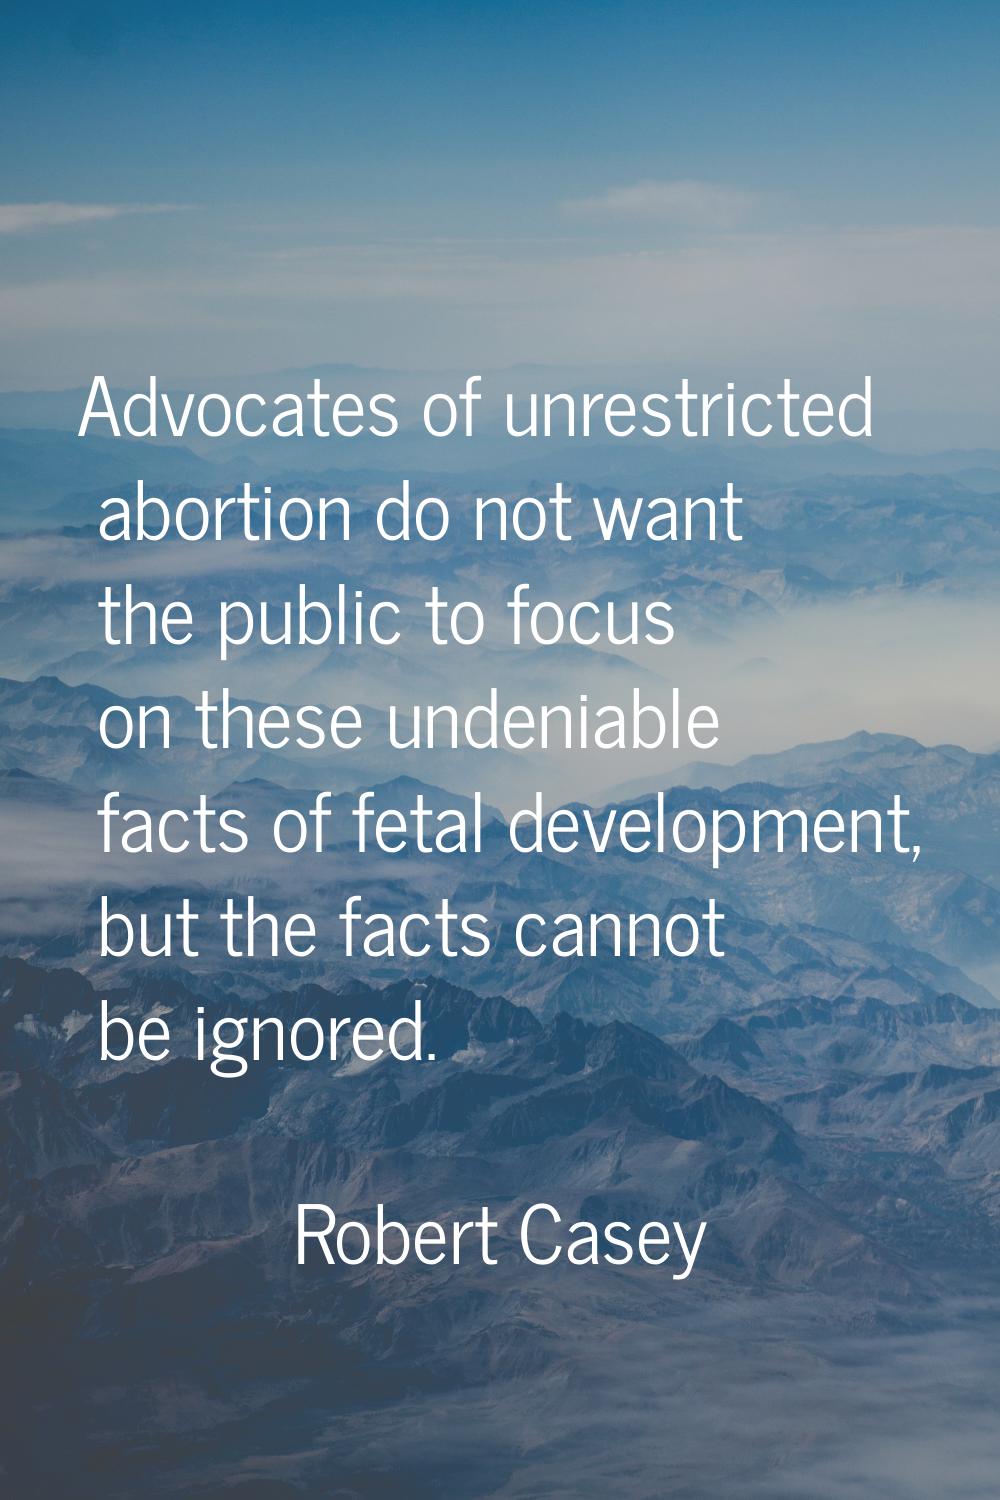 Advocates of unrestricted abortion do not want the public to focus on these undeniable facts of fet